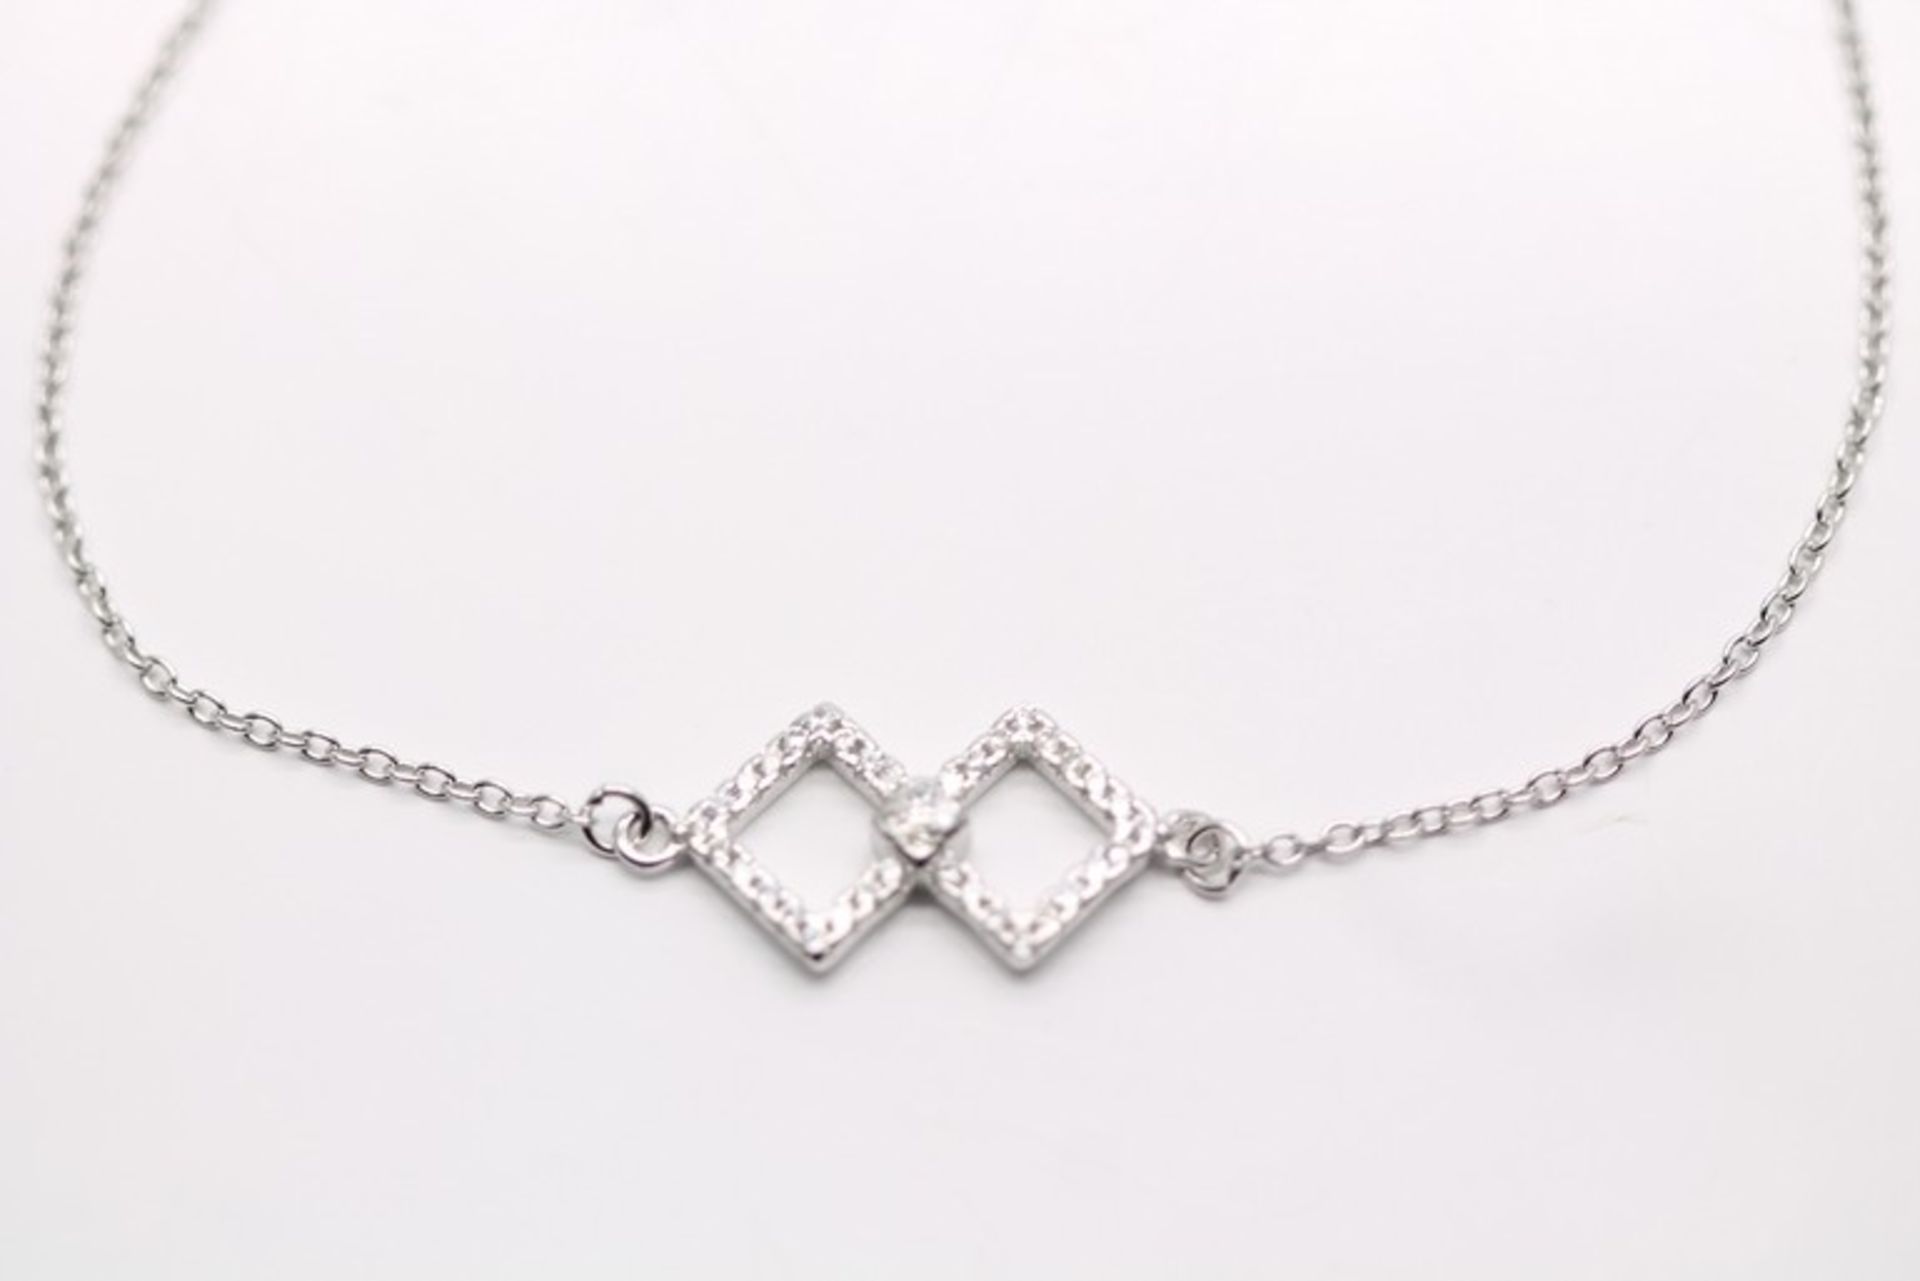 1 x BOXED BRAND NEW SOLID SILVER LADIES BRACELET WITH AAA+ SIMULATED DIAMONDS SET IN A SQUARE DROP